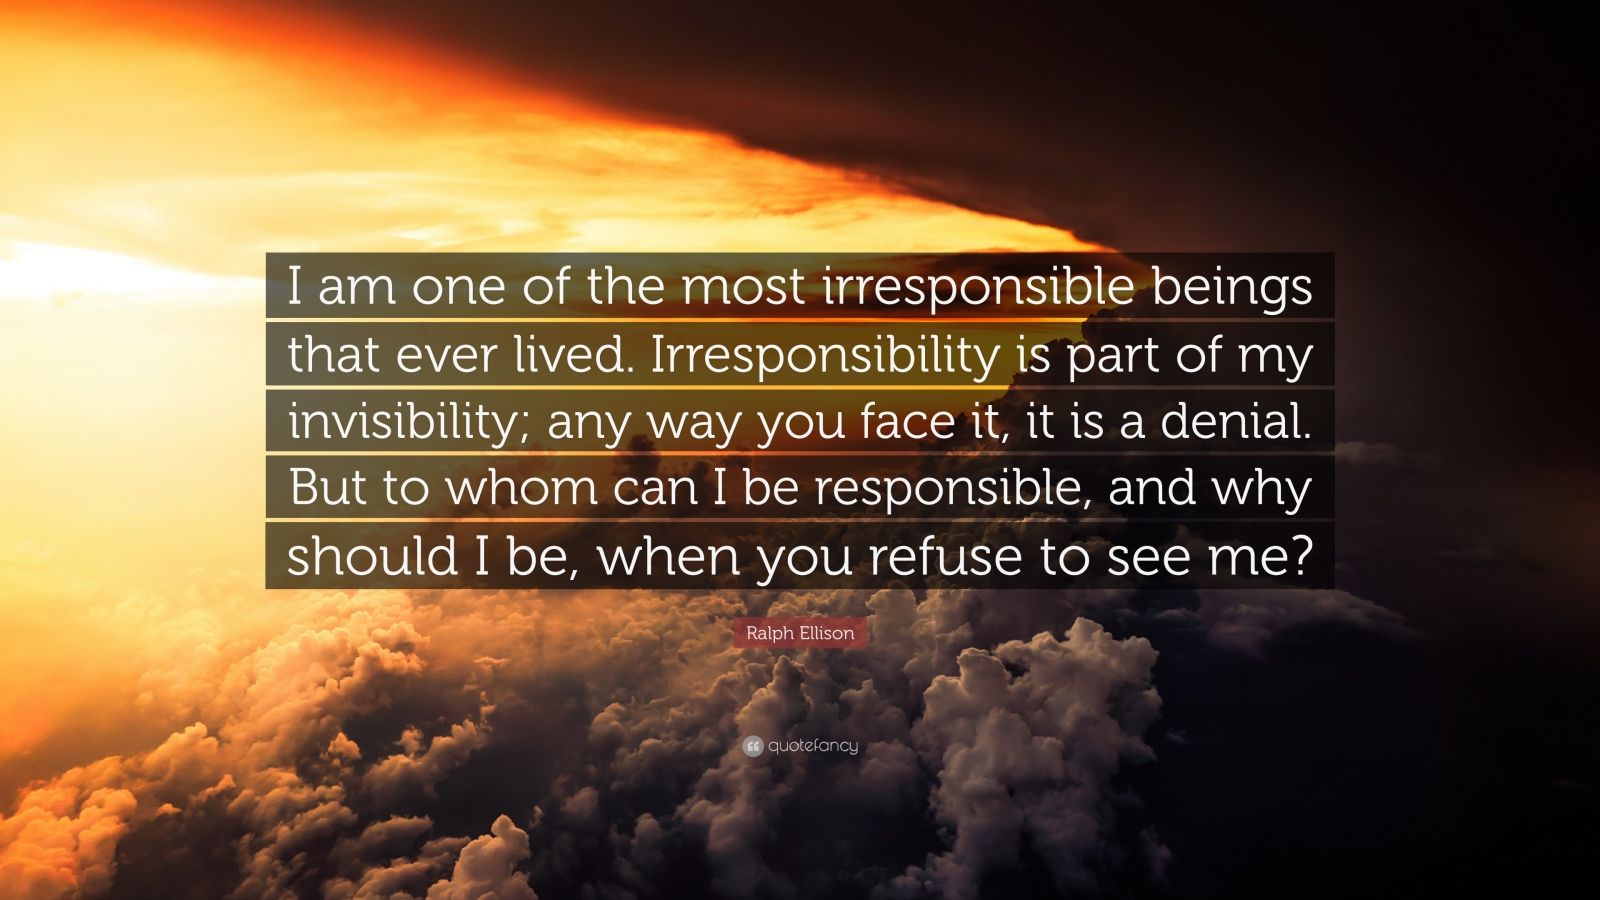 Ralph Ellison Quote: “I am one of the most irresponsible beings that ...